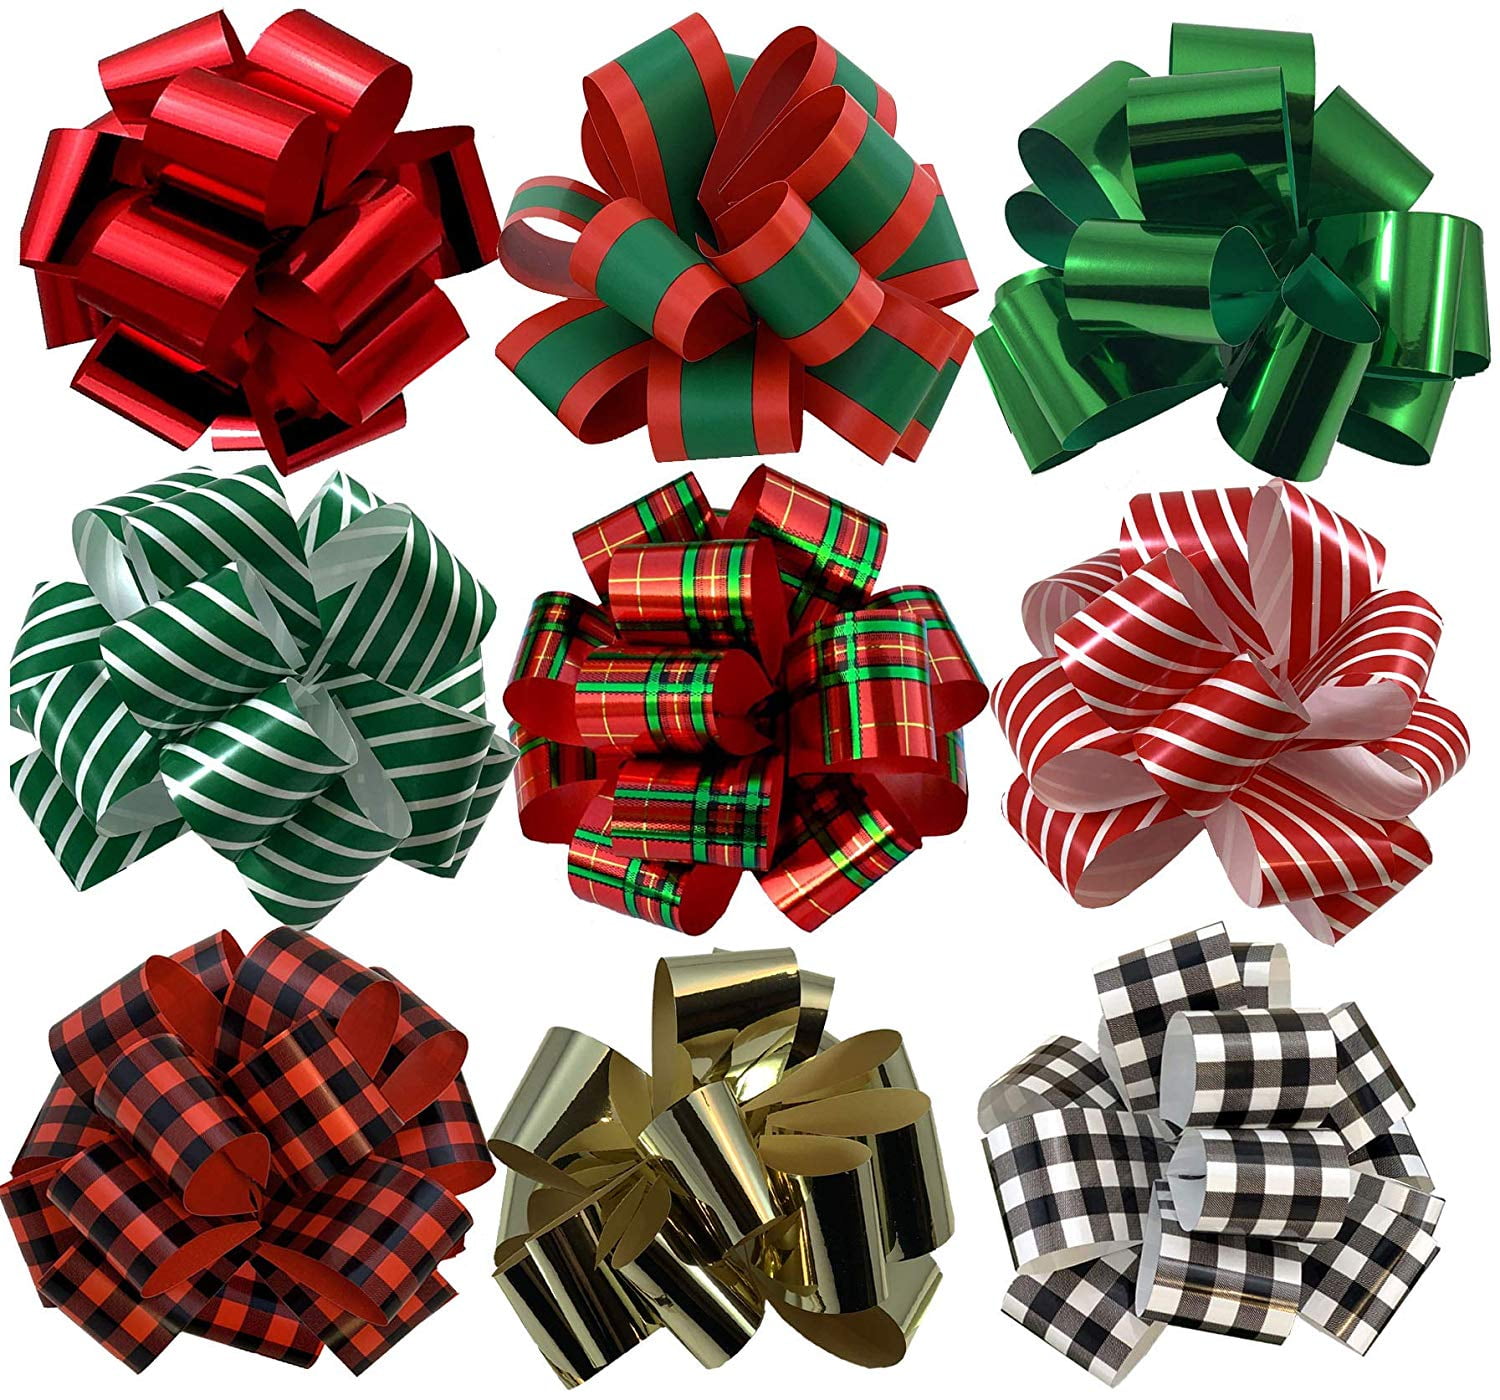 16 RED ASSORTED METALLIC BOWS SELF ADHESIVE CHRISTMAS XMAS PRESENT GIFT WRAPPING 